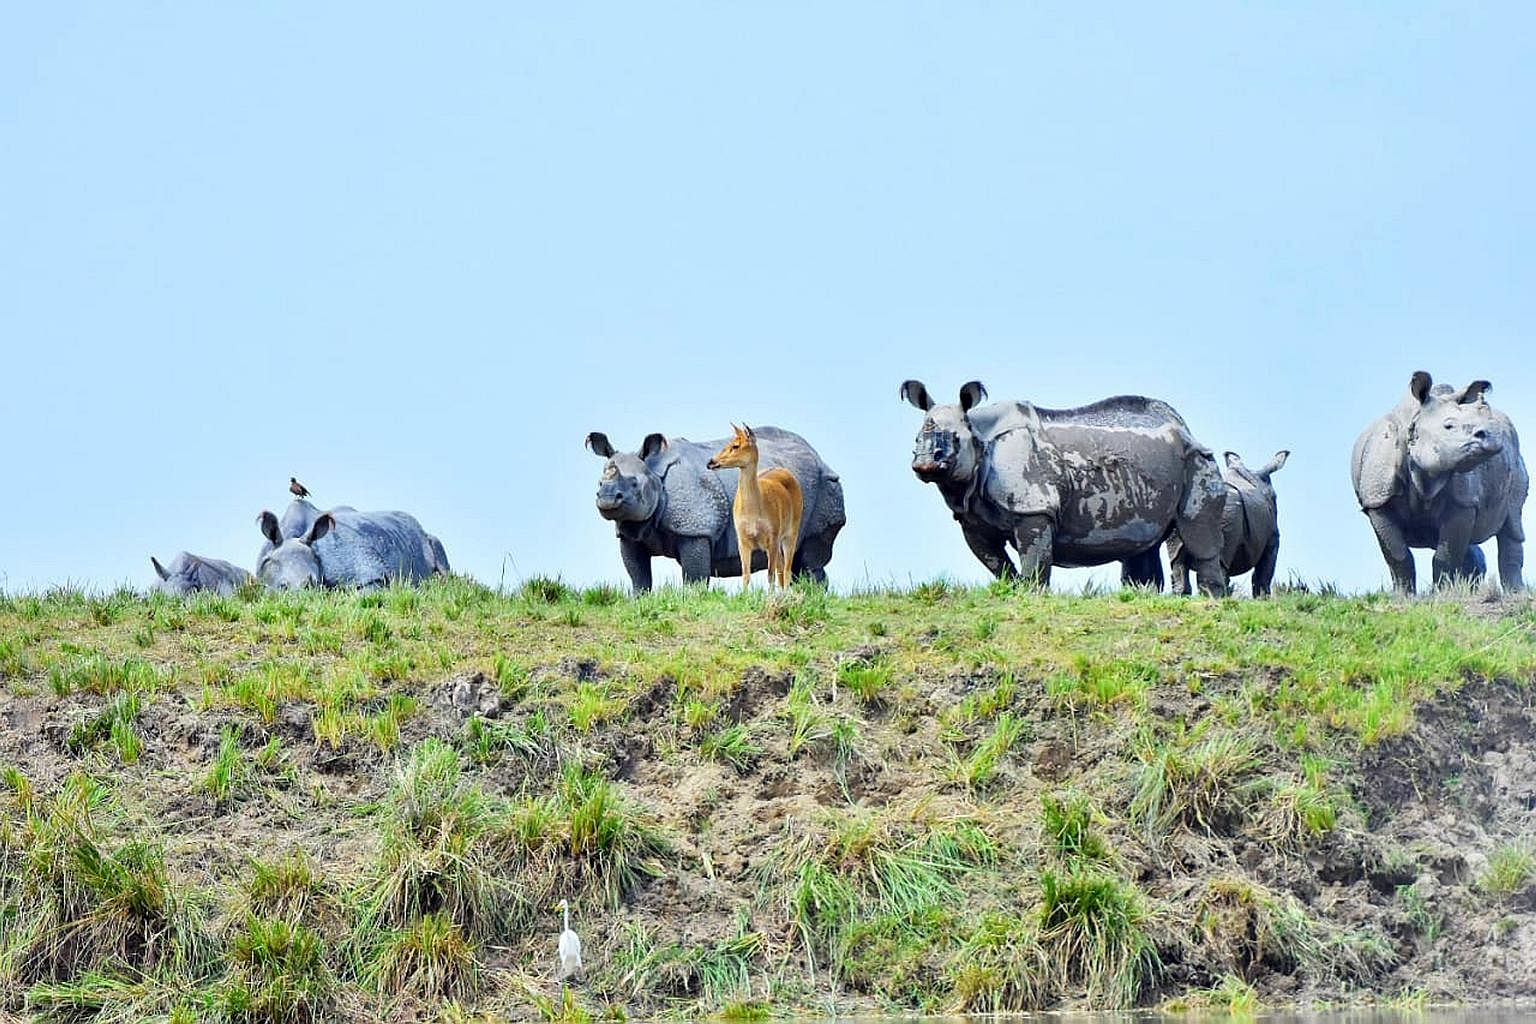 Vistit Kaziranga National Park and see the one horn rhinoceros with Authentic India Tours